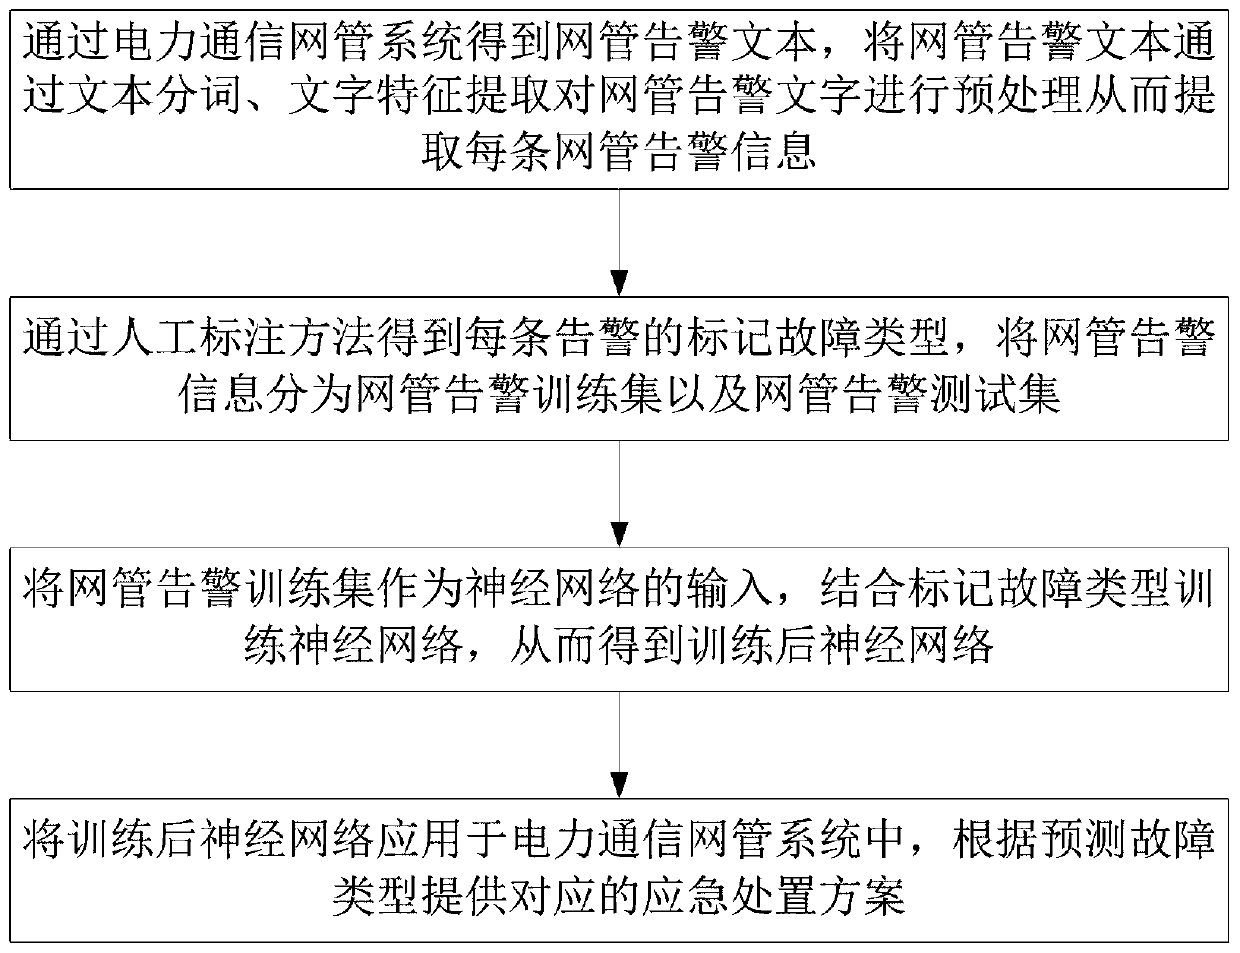 Electric power communication fault emergency disposal method based on neural network classification